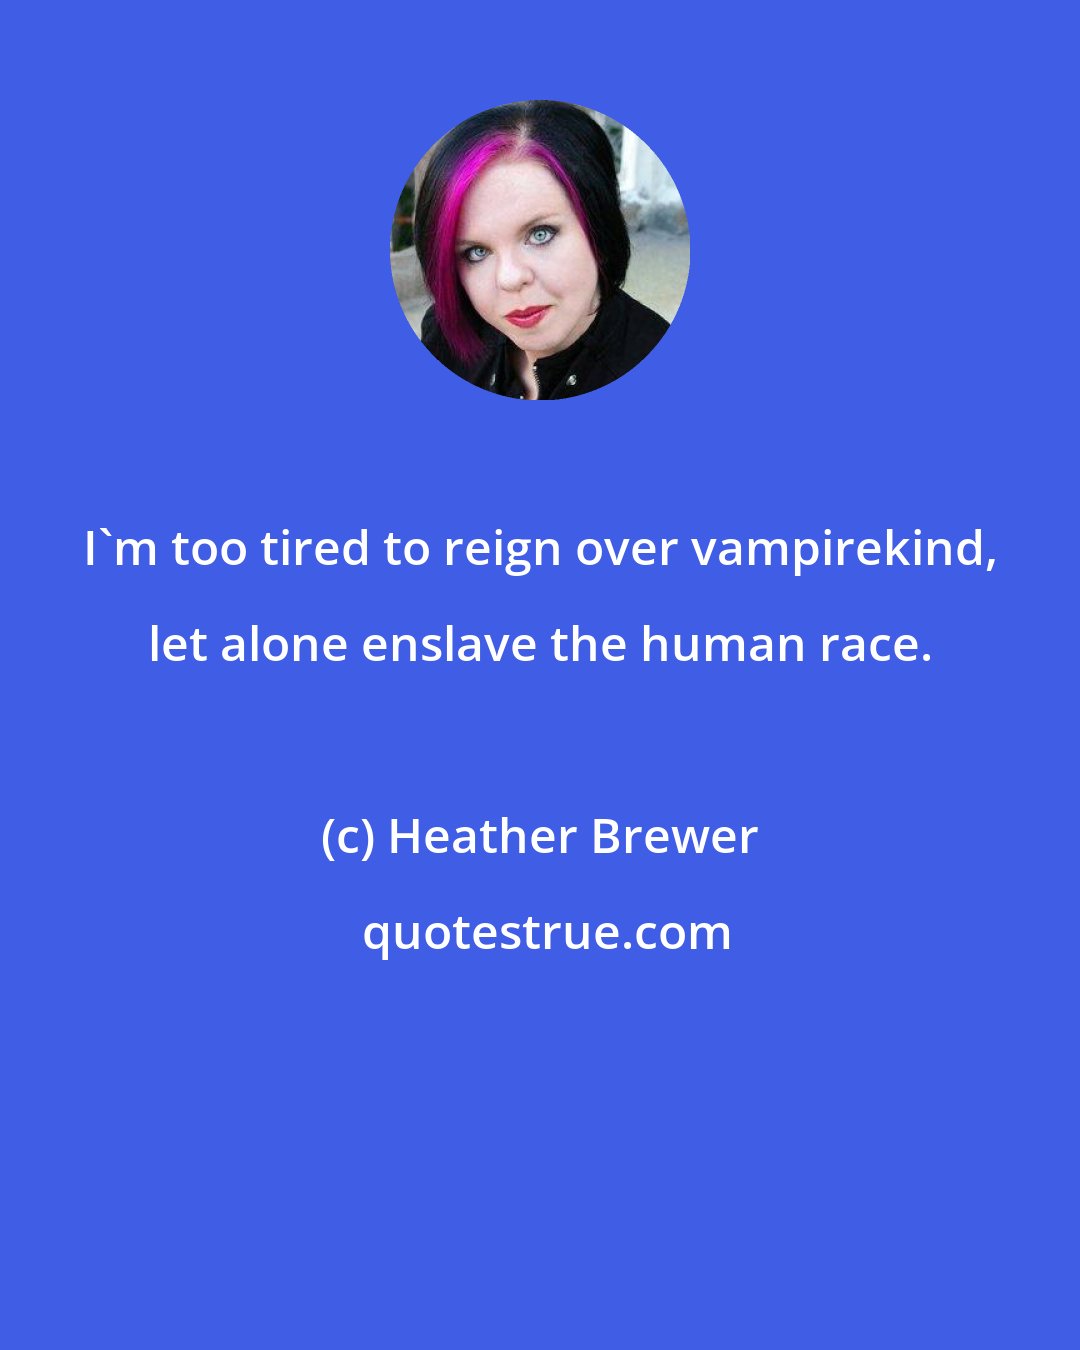 Heather Brewer: I'm too tired to reign over vampirekind, let alone enslave the human race.